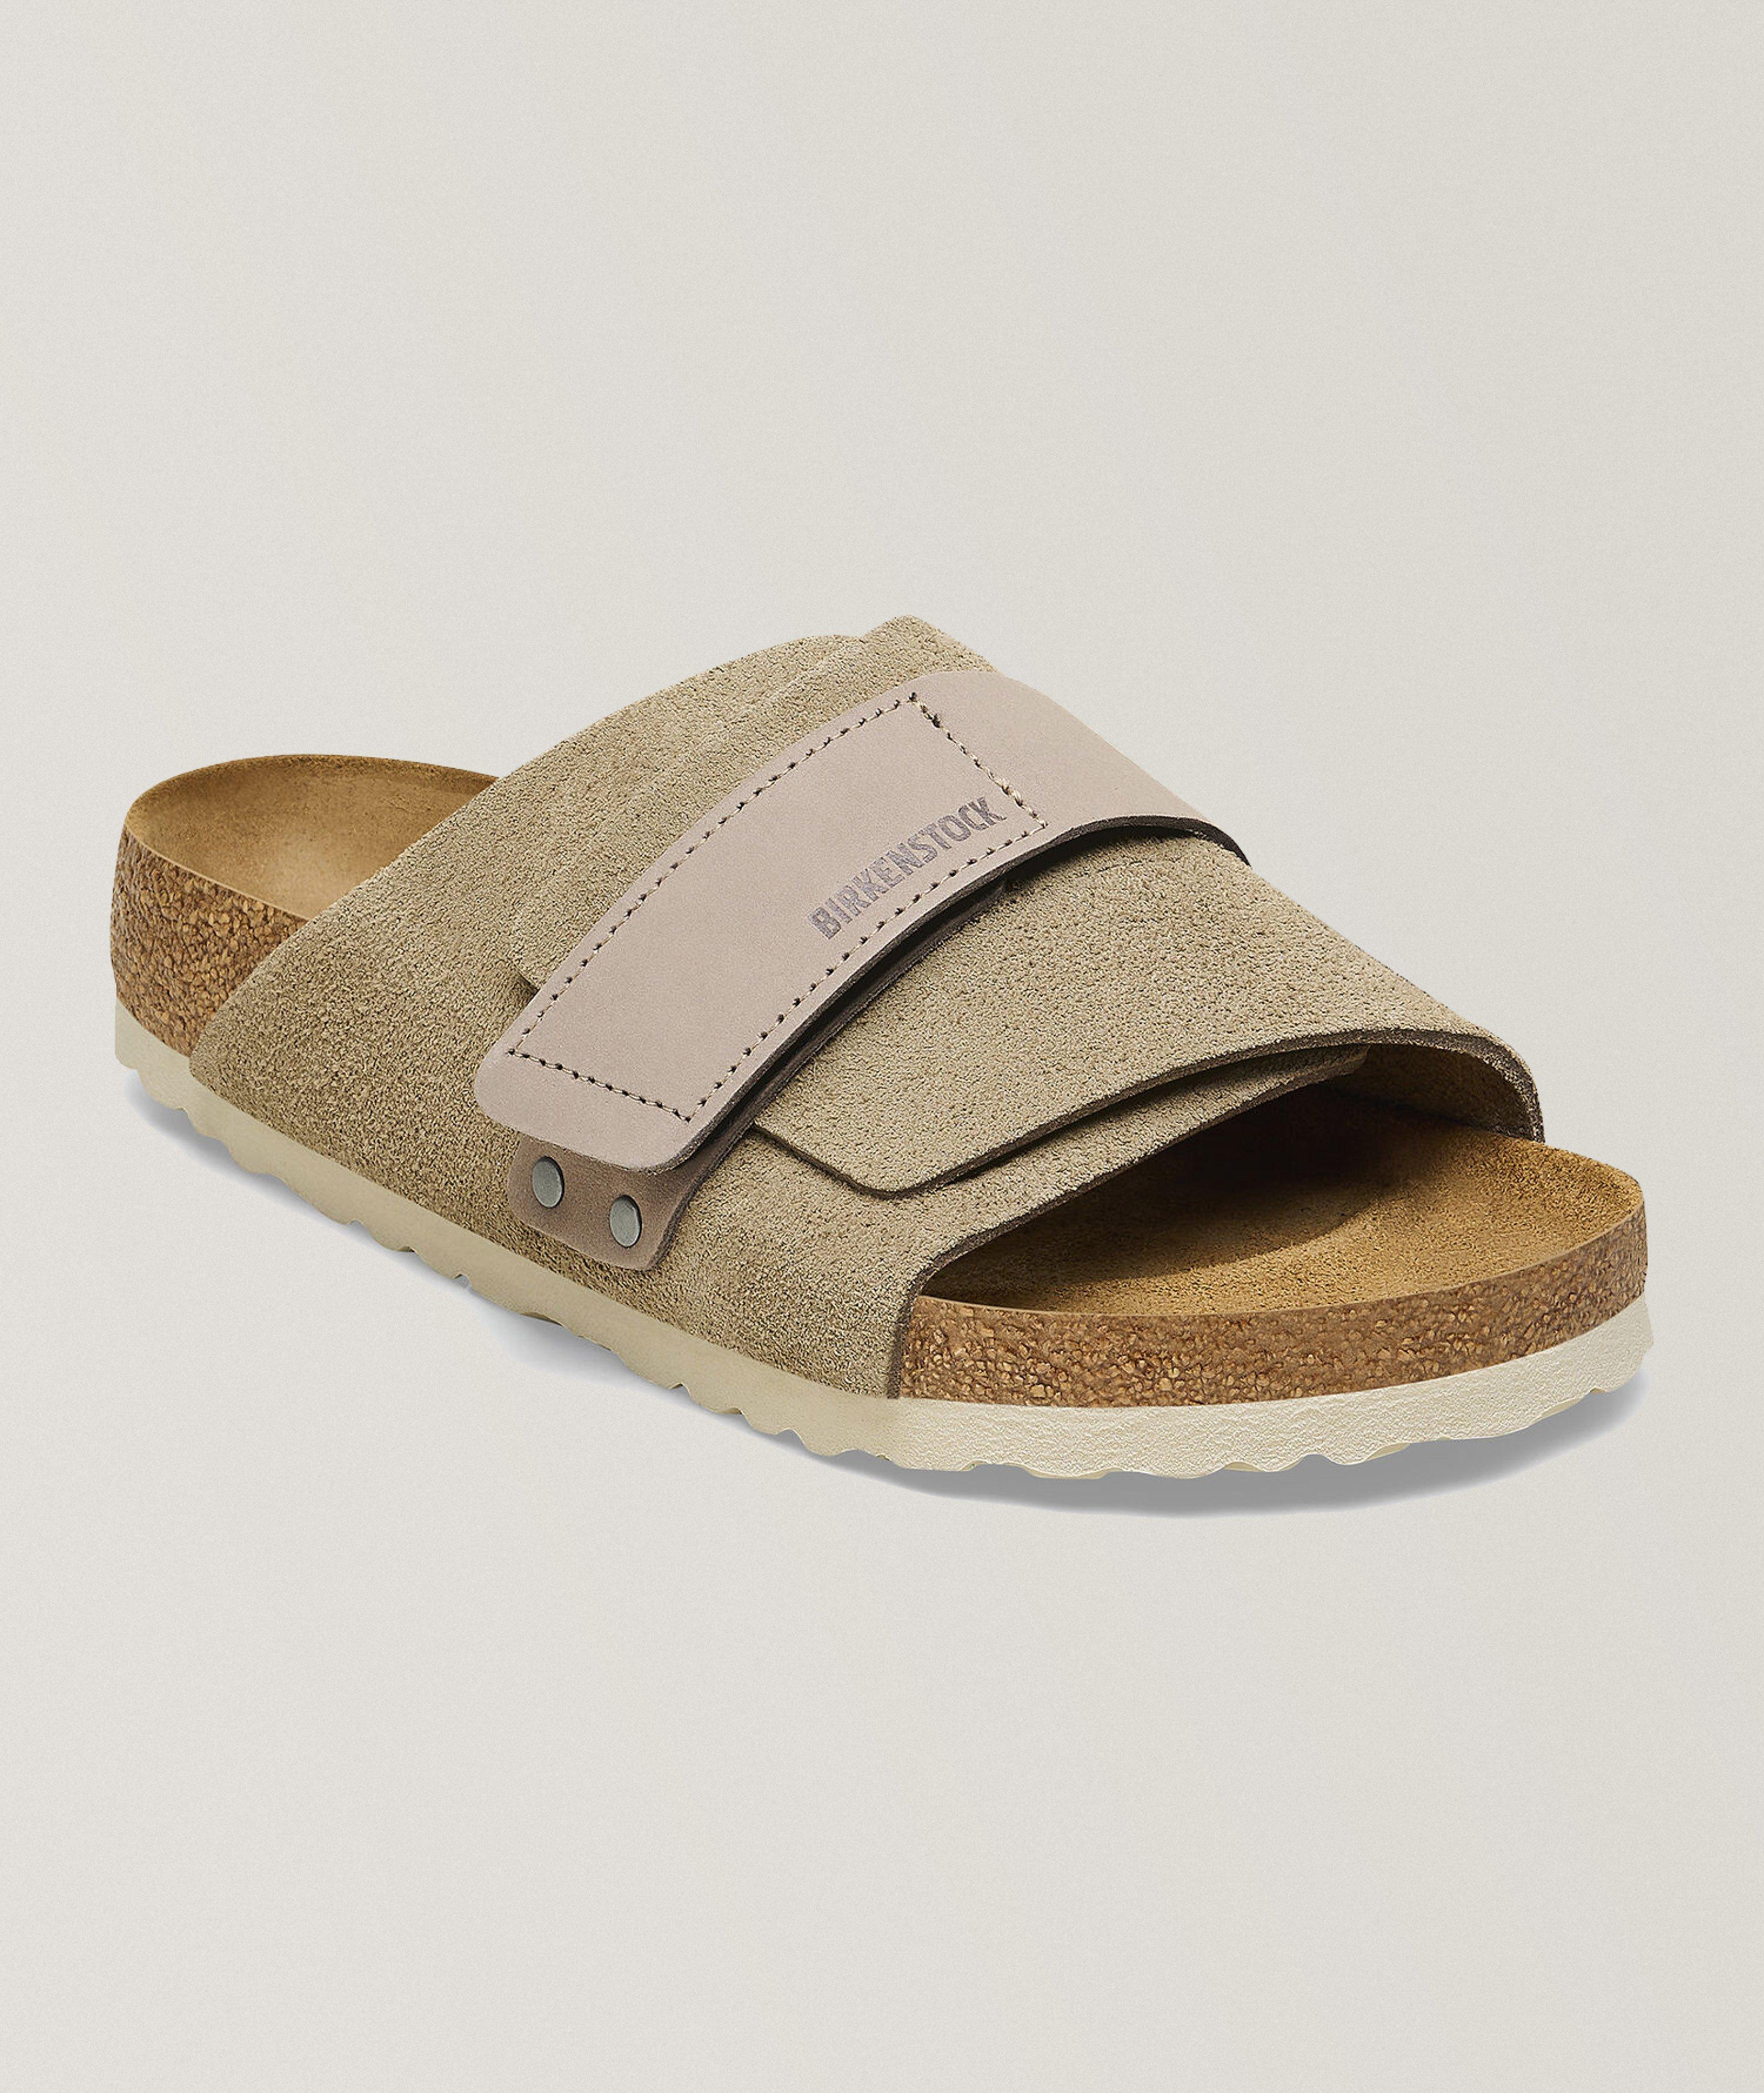 Kyoto Nubuck & Suede Leather Sandals